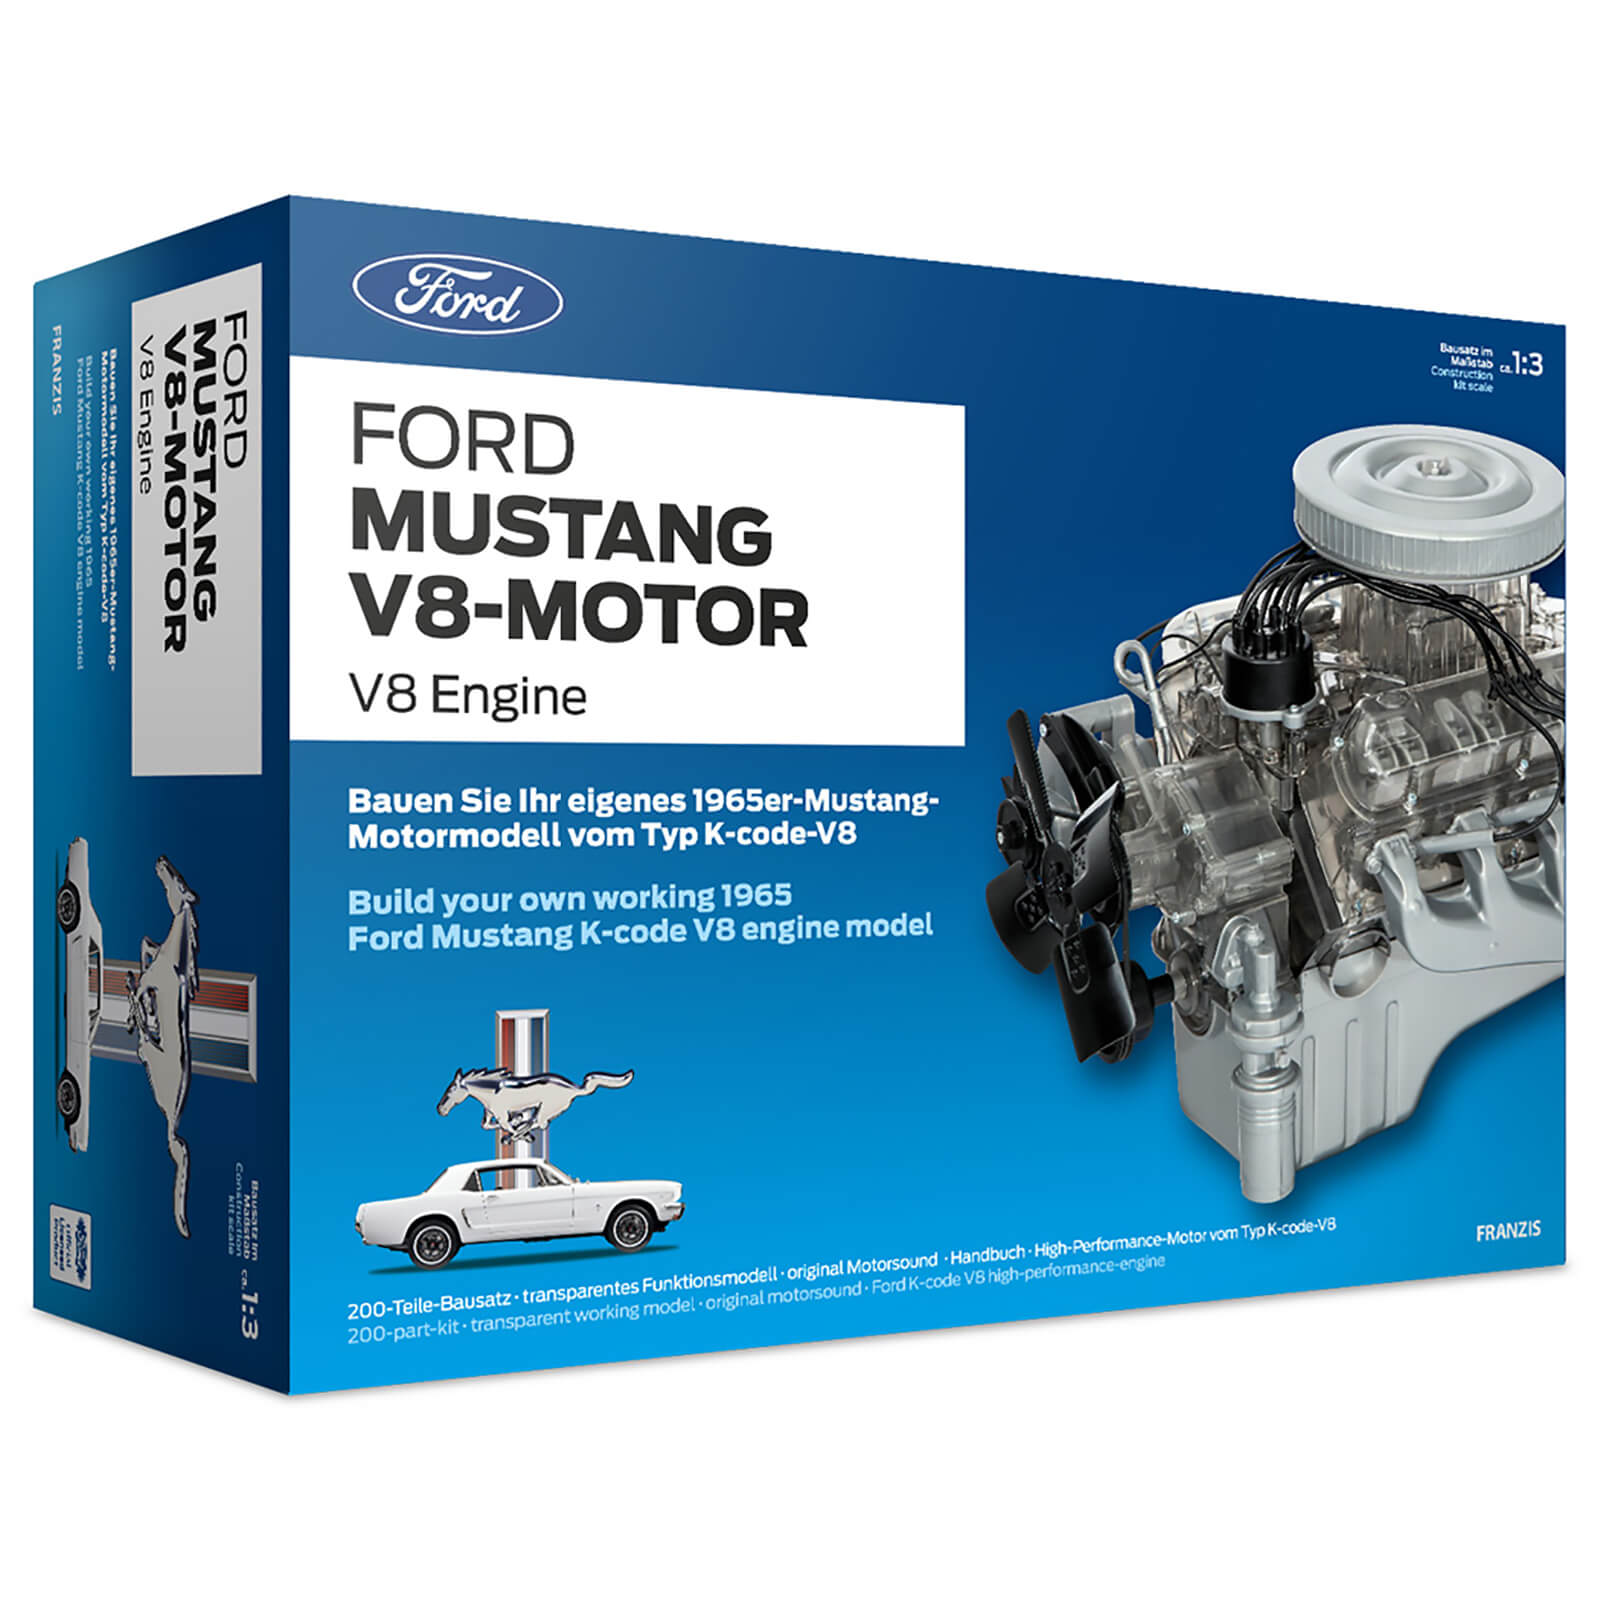 Franzis Official Ford Mustang V8 Engine